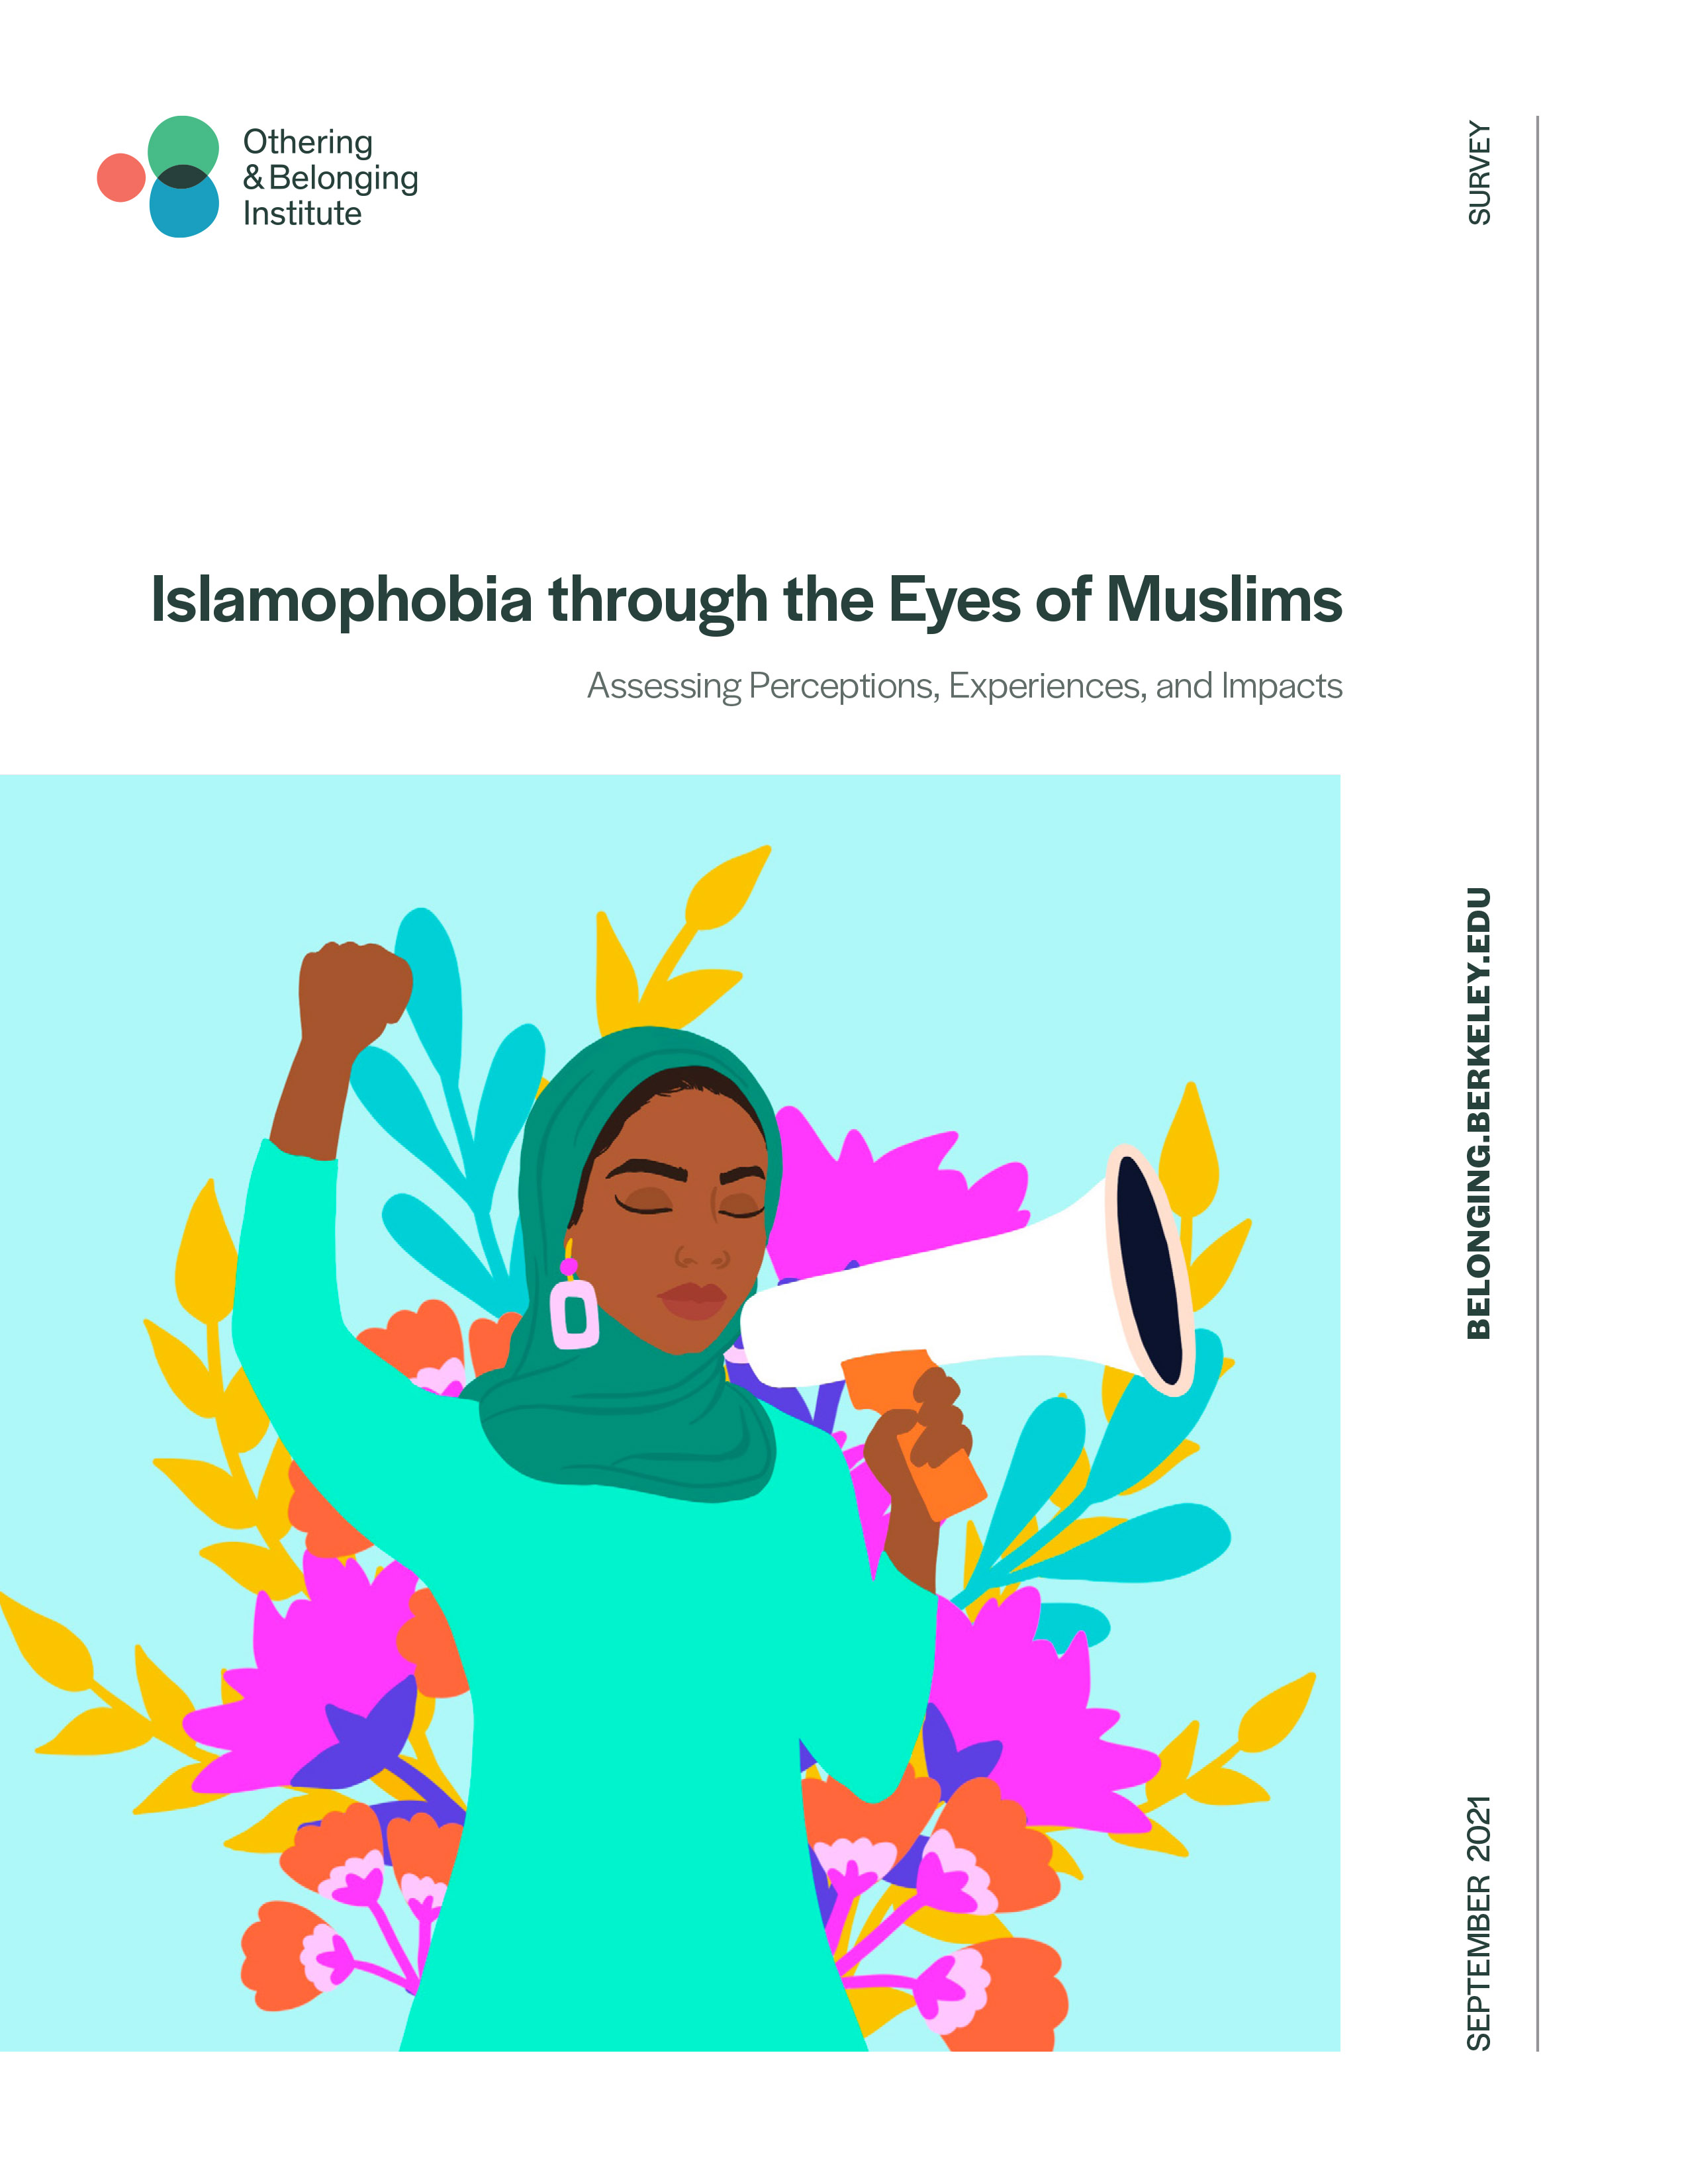 cover of 'Islamophobia through the eyes of Muslims' report, featuring an illustration of a hijabi woman raising her fist'